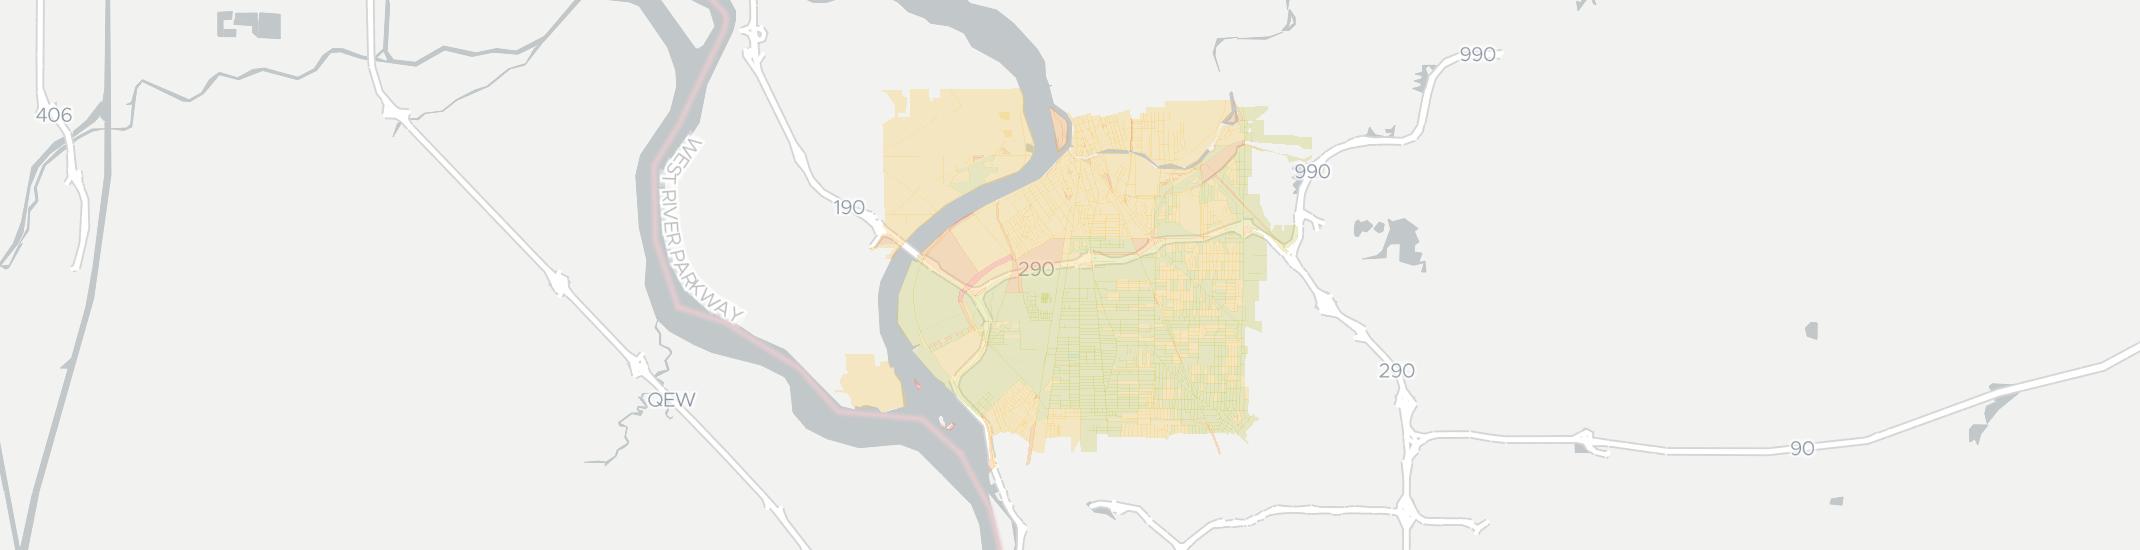 Tonawanda Internet Competition Map. Click for interactive map